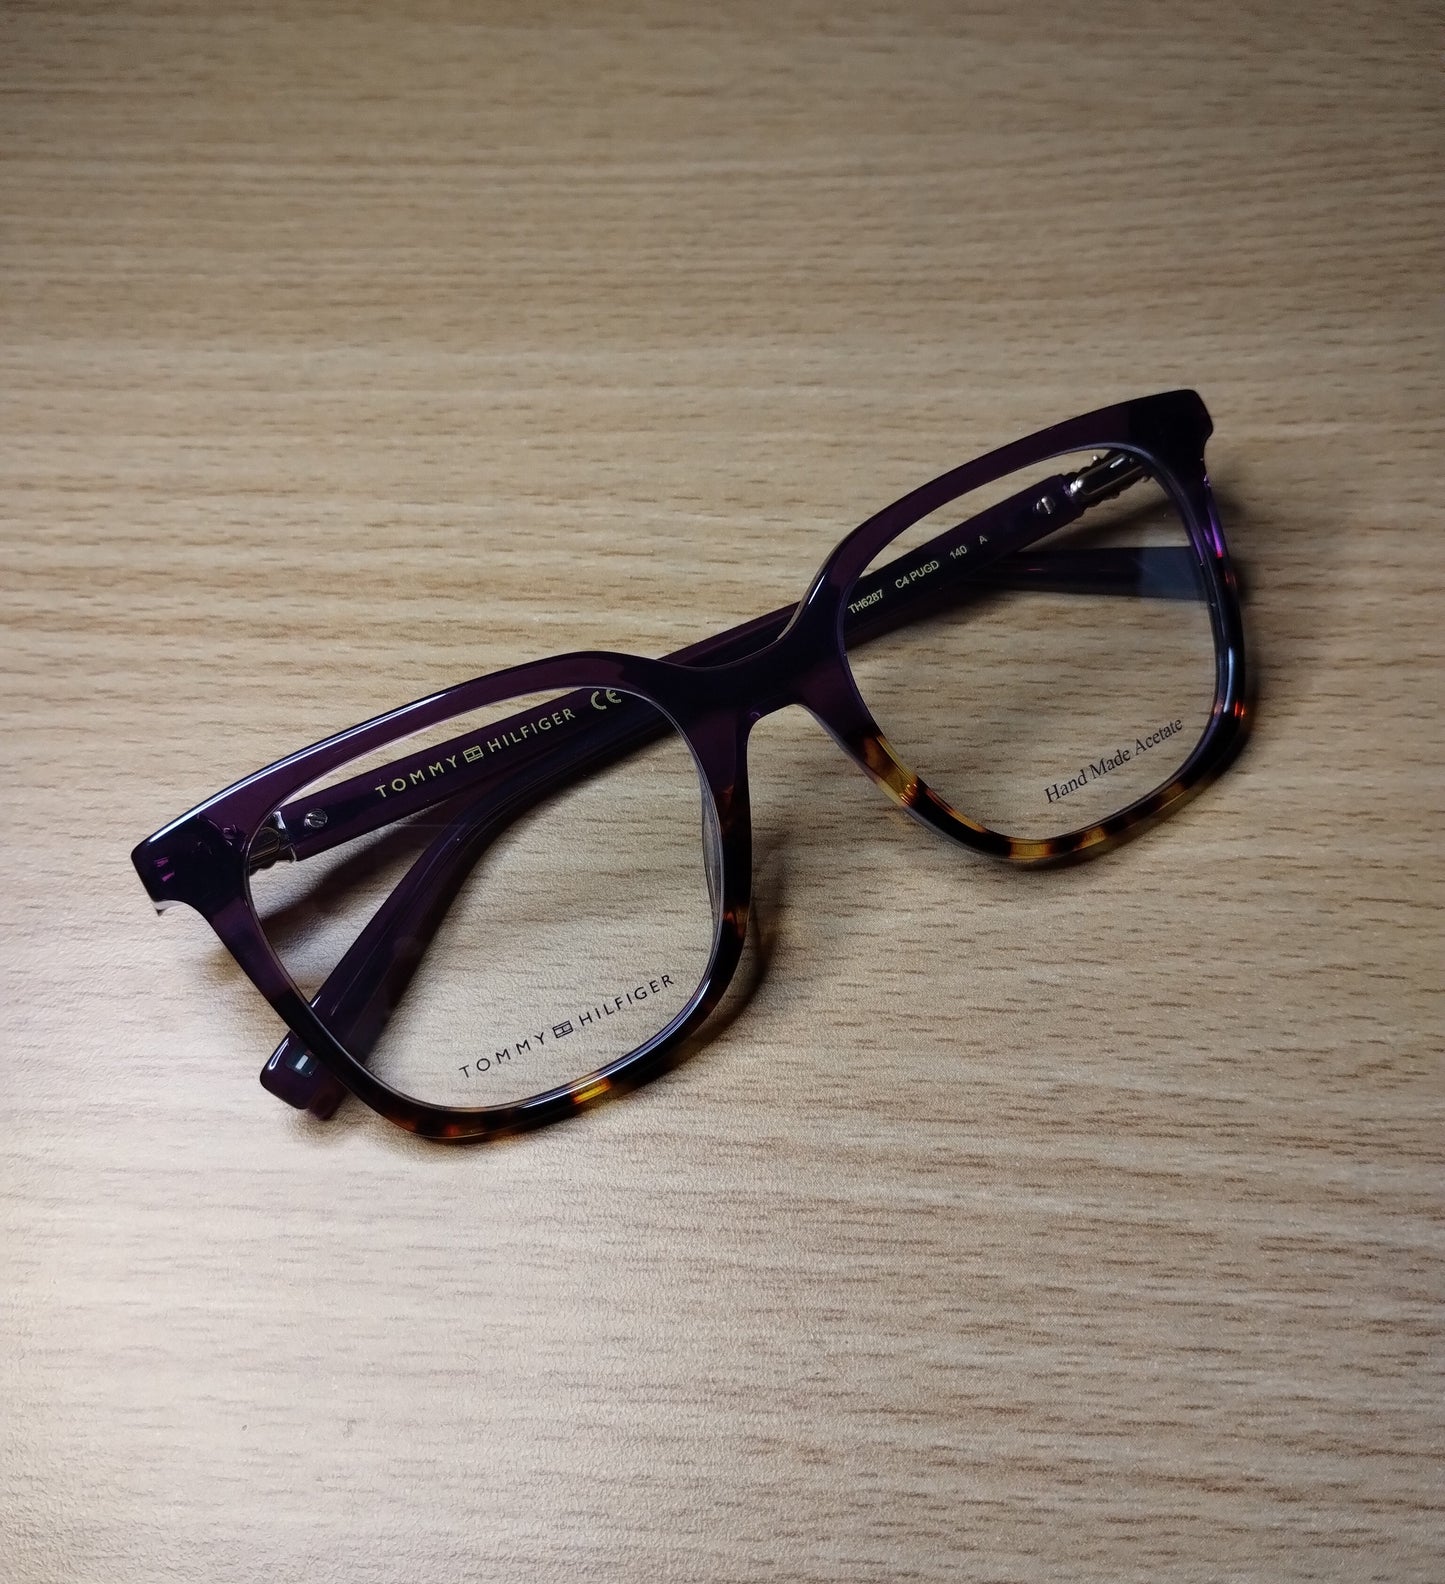 Tommy Hilfiger TH 6287 C4 51-19-140 Purple and Demi Amber Square Frame